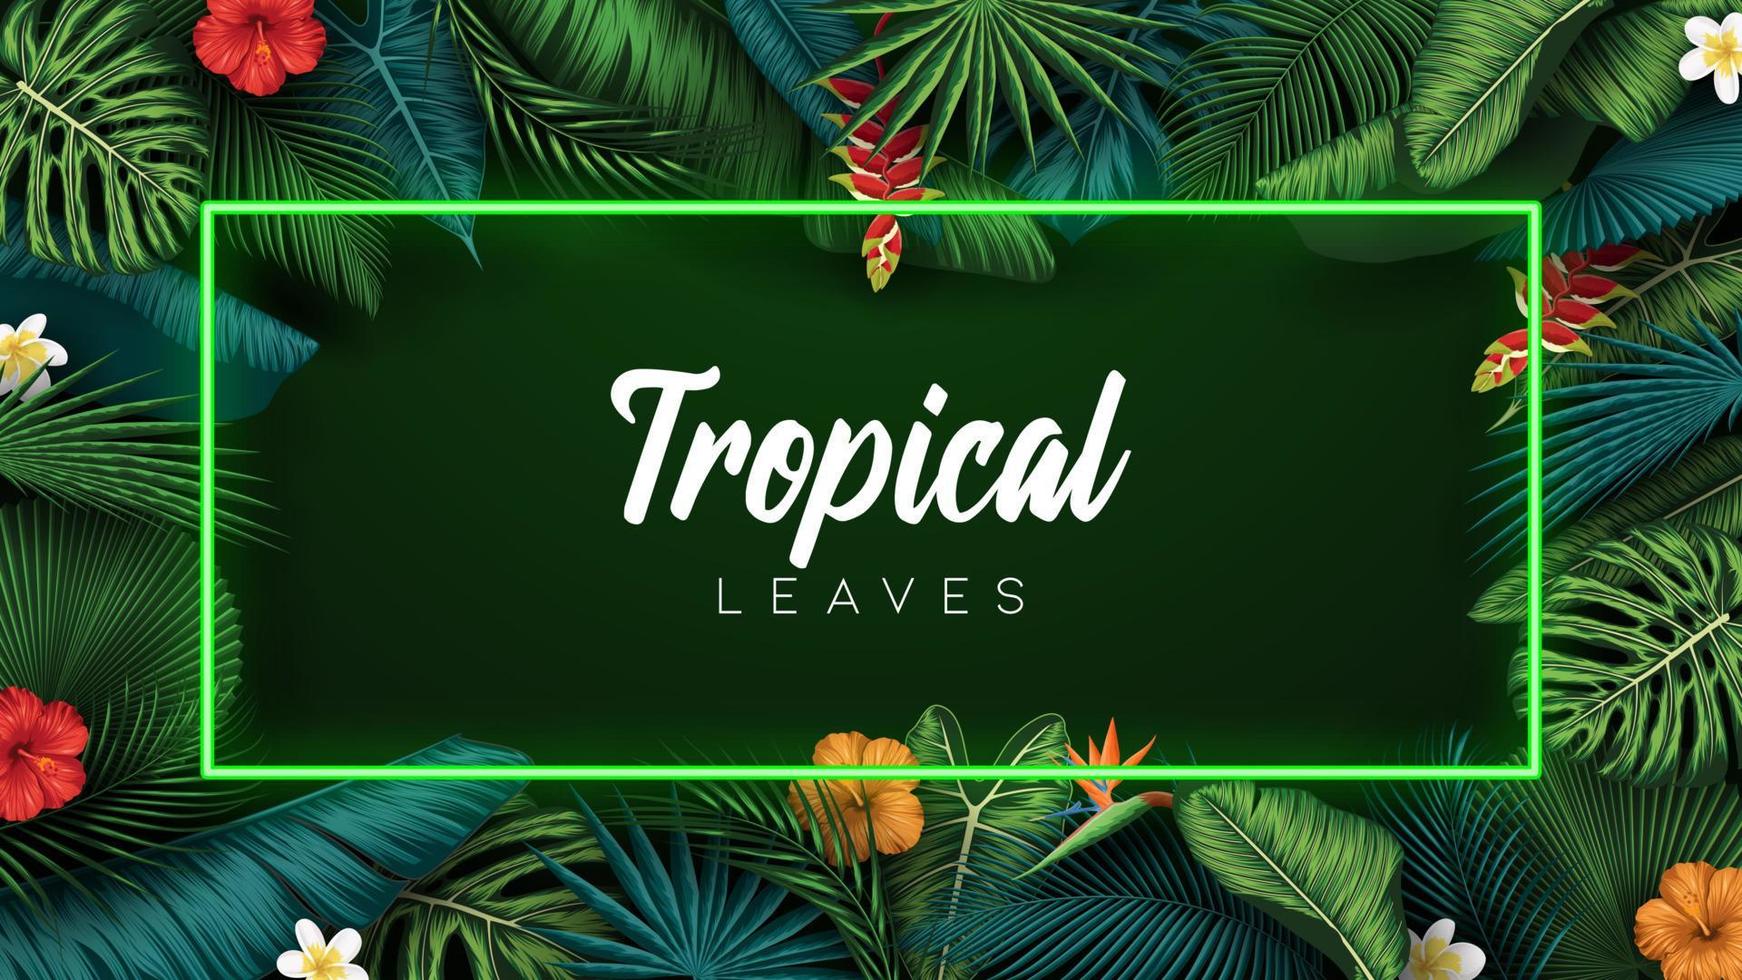 Tropical summer leaves background with jungle plants vector